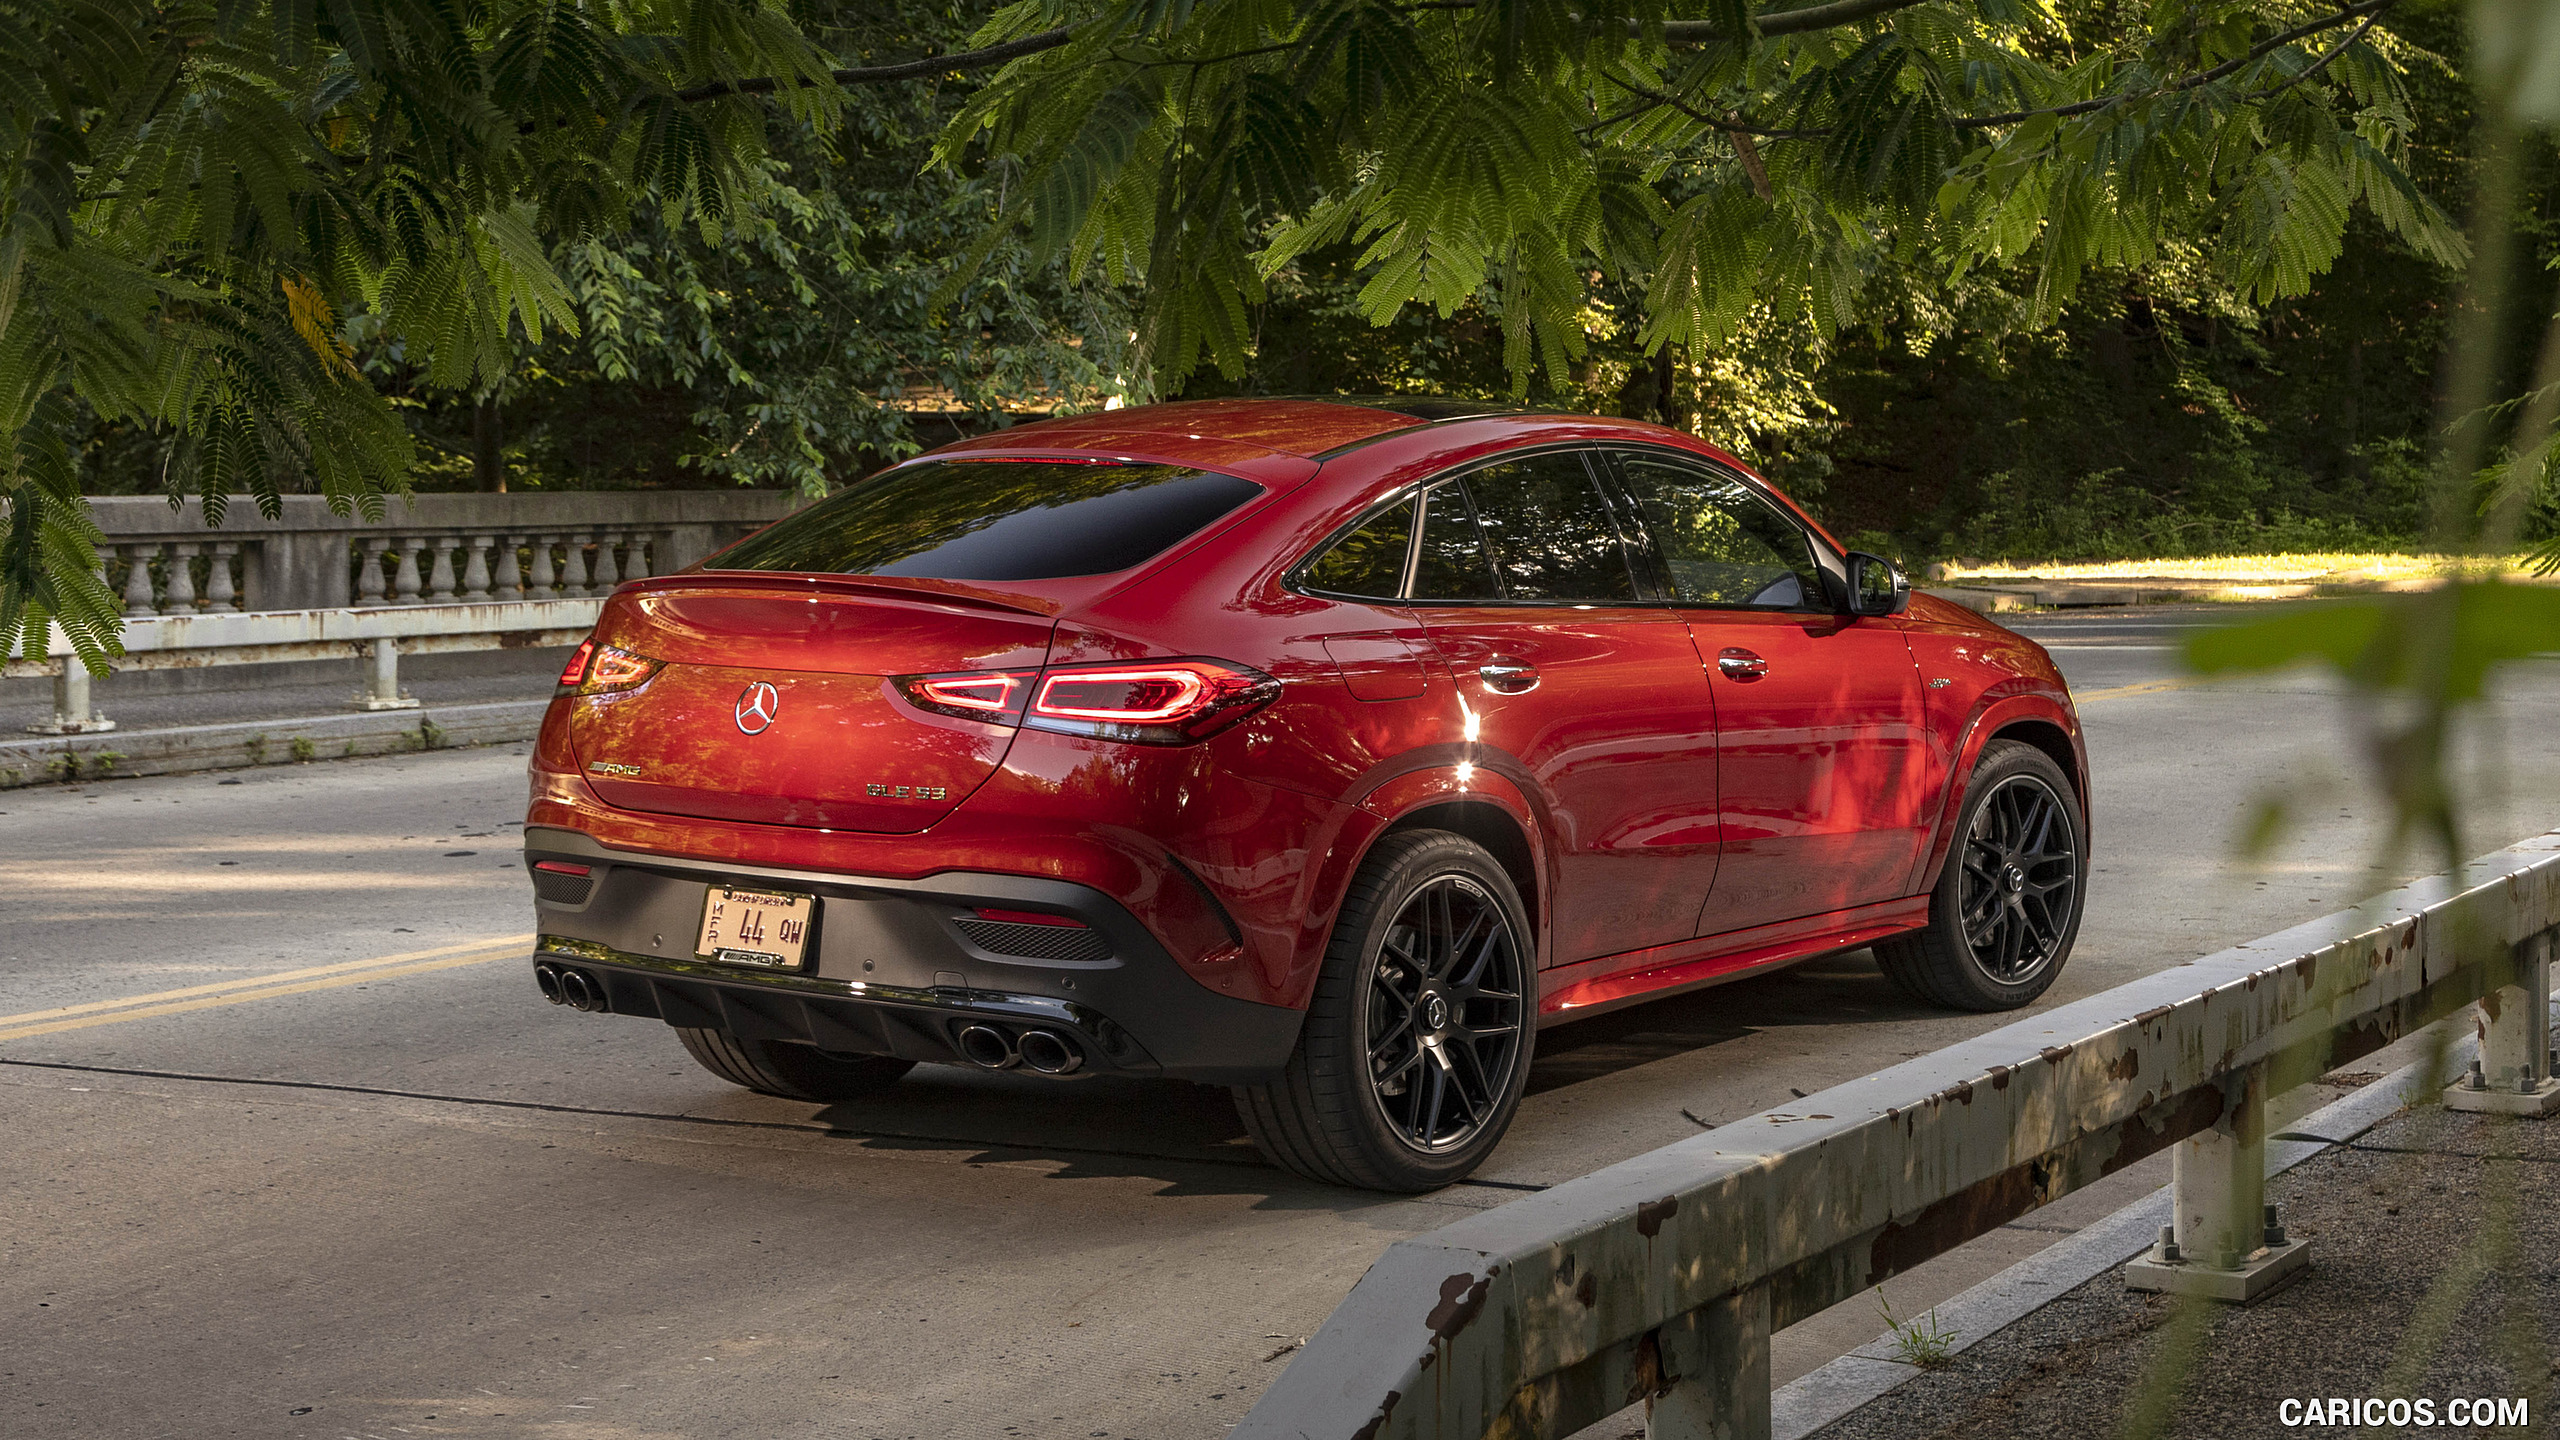 2021 Mercedes-AMG GLE 53 Coupe - Rear Three-Quarter, #136 of 178